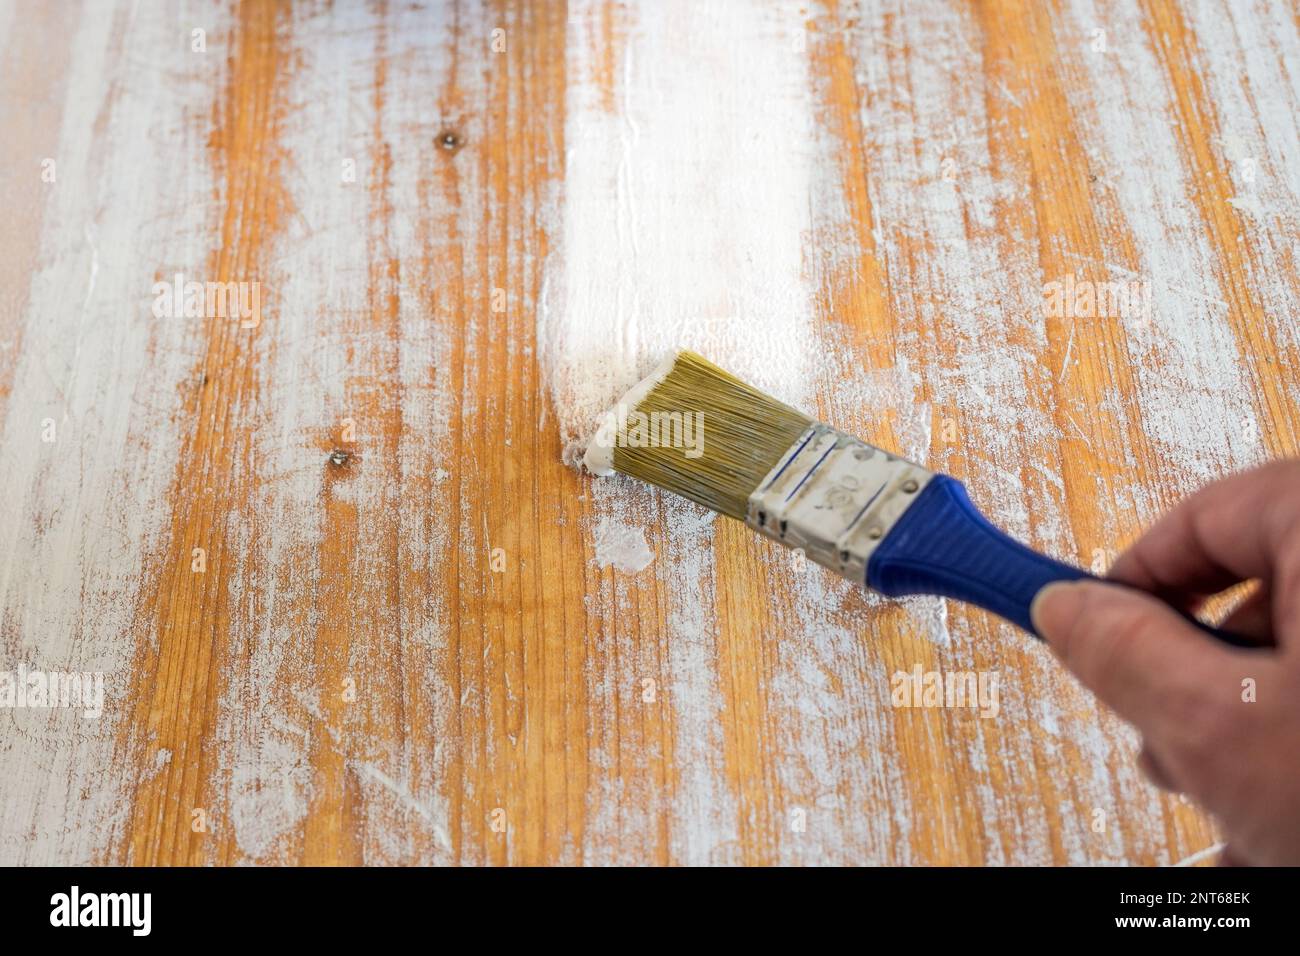 Painting a wooden surface with a paint brush and white lacquer, diy concept and craft at home, copy space, selected focus, narrow depth of field Stock Photo